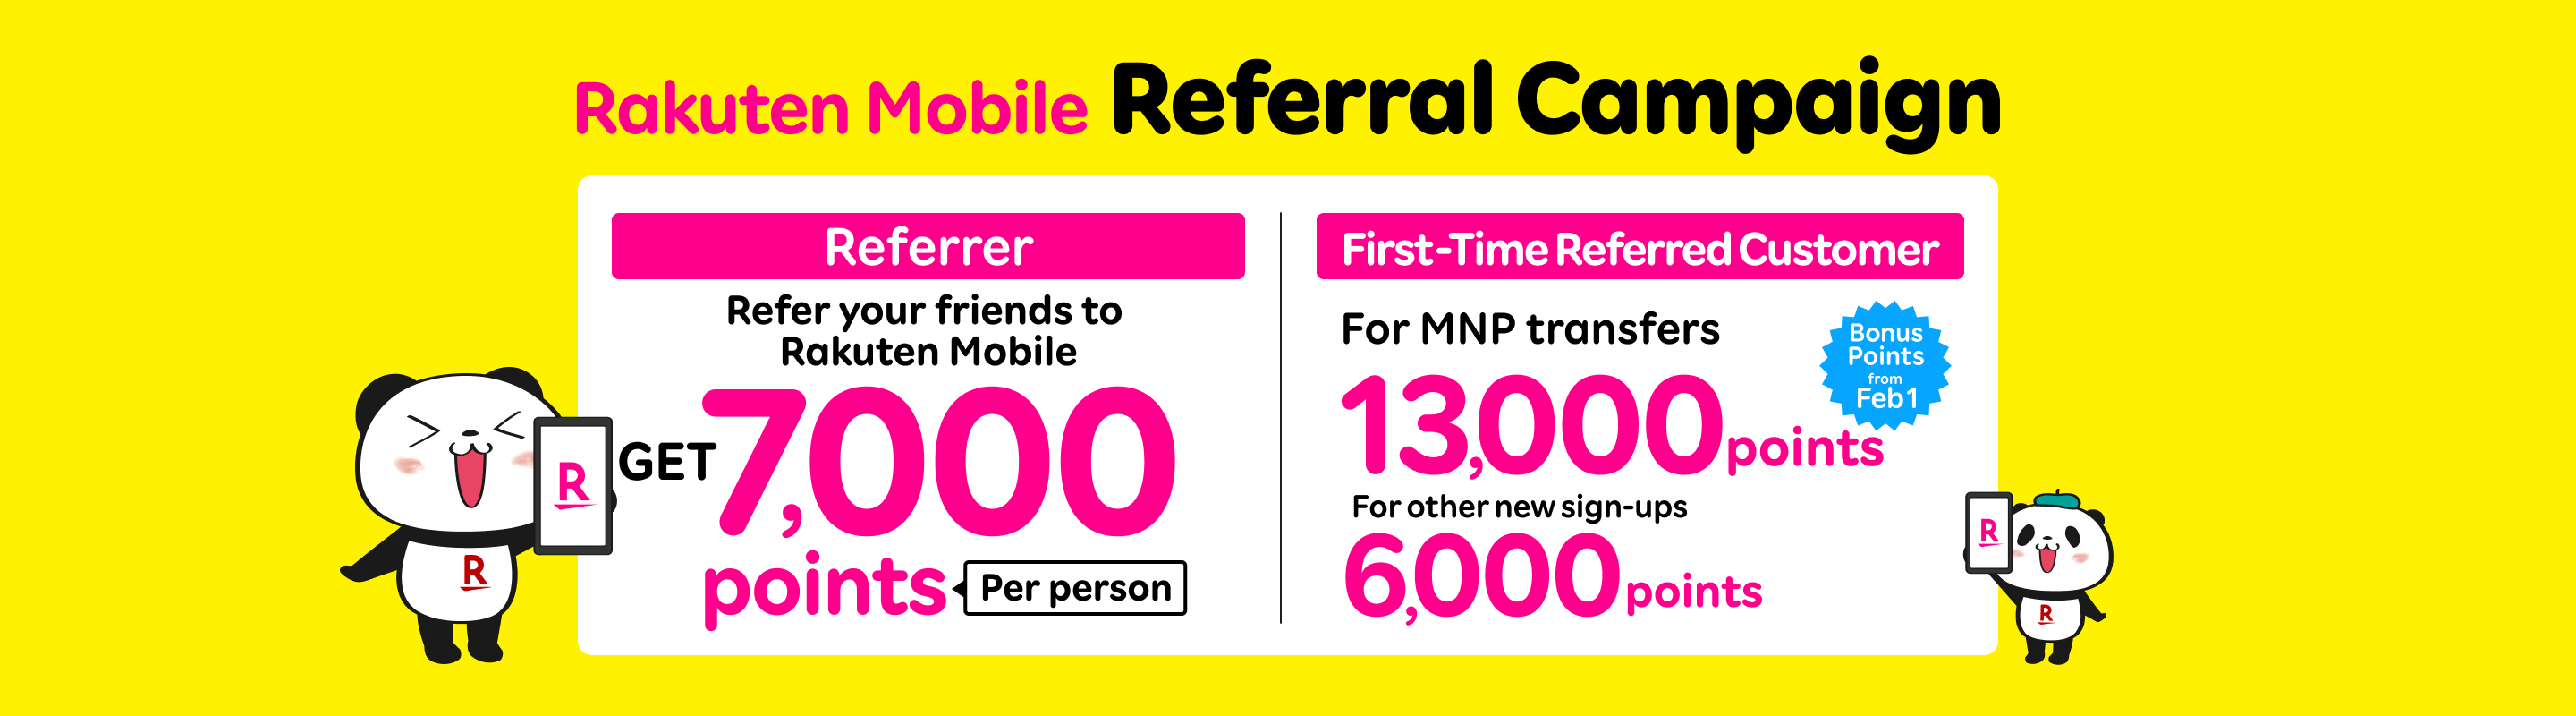 Refer your family and friends to Rakuten Mobile and get 7,000 points per person. The referred friends will also receive 13,000 points for MNP transfers, or 6,000 points for other new sign-ups. 